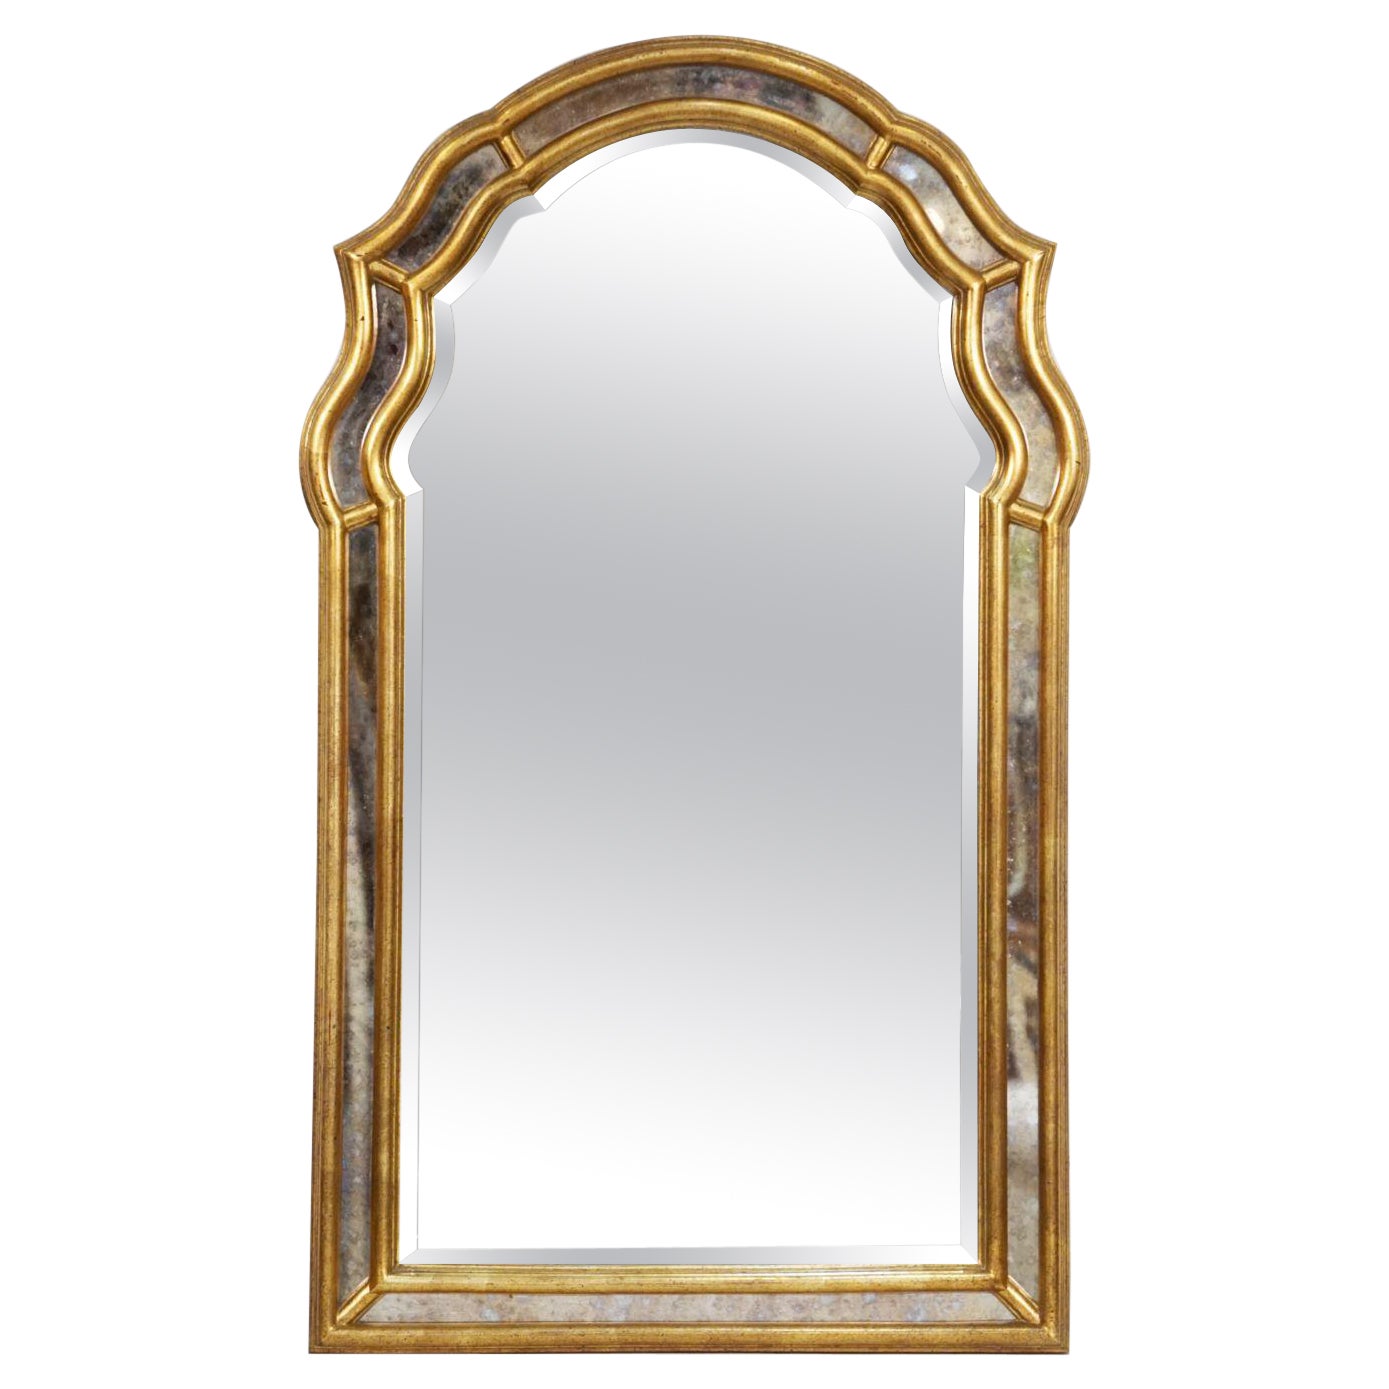 Large French Arch-Top Gilt Wall Mirror (H 45 1/2 x W 27 1/2) For Sale